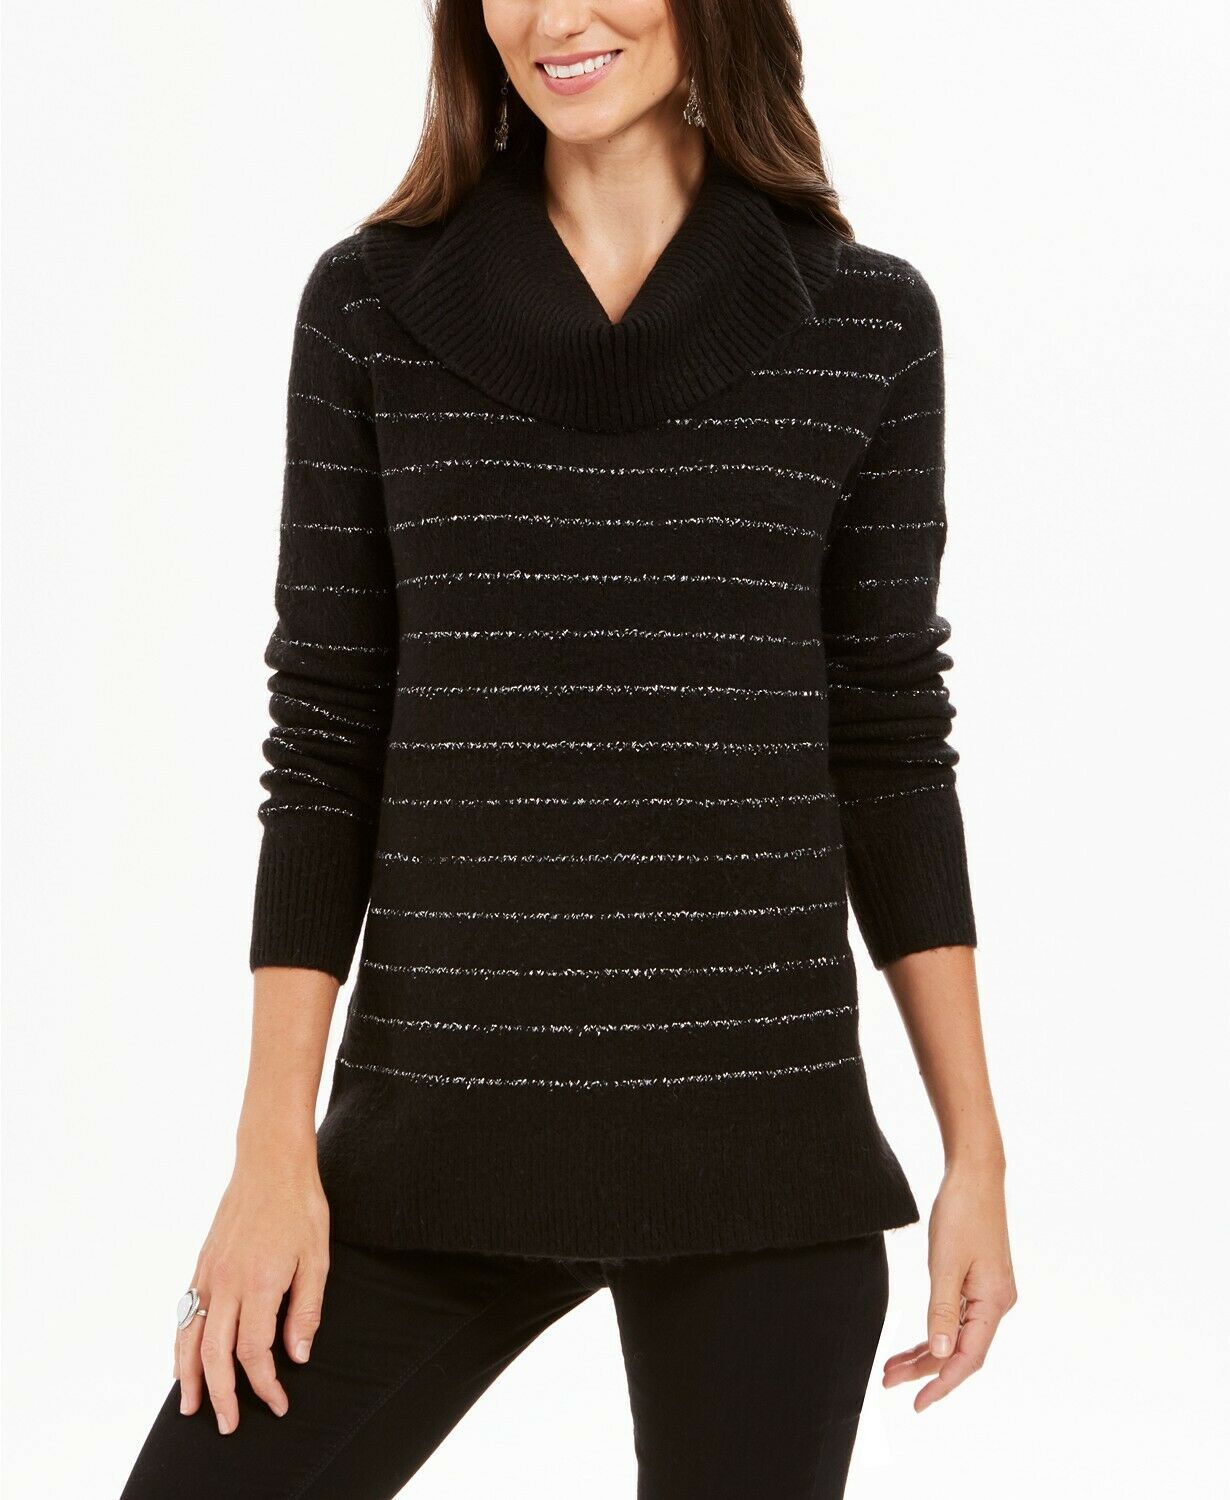 Style & Co Women's Black Lurex Cowl-Neck Pullover Sweater, Large